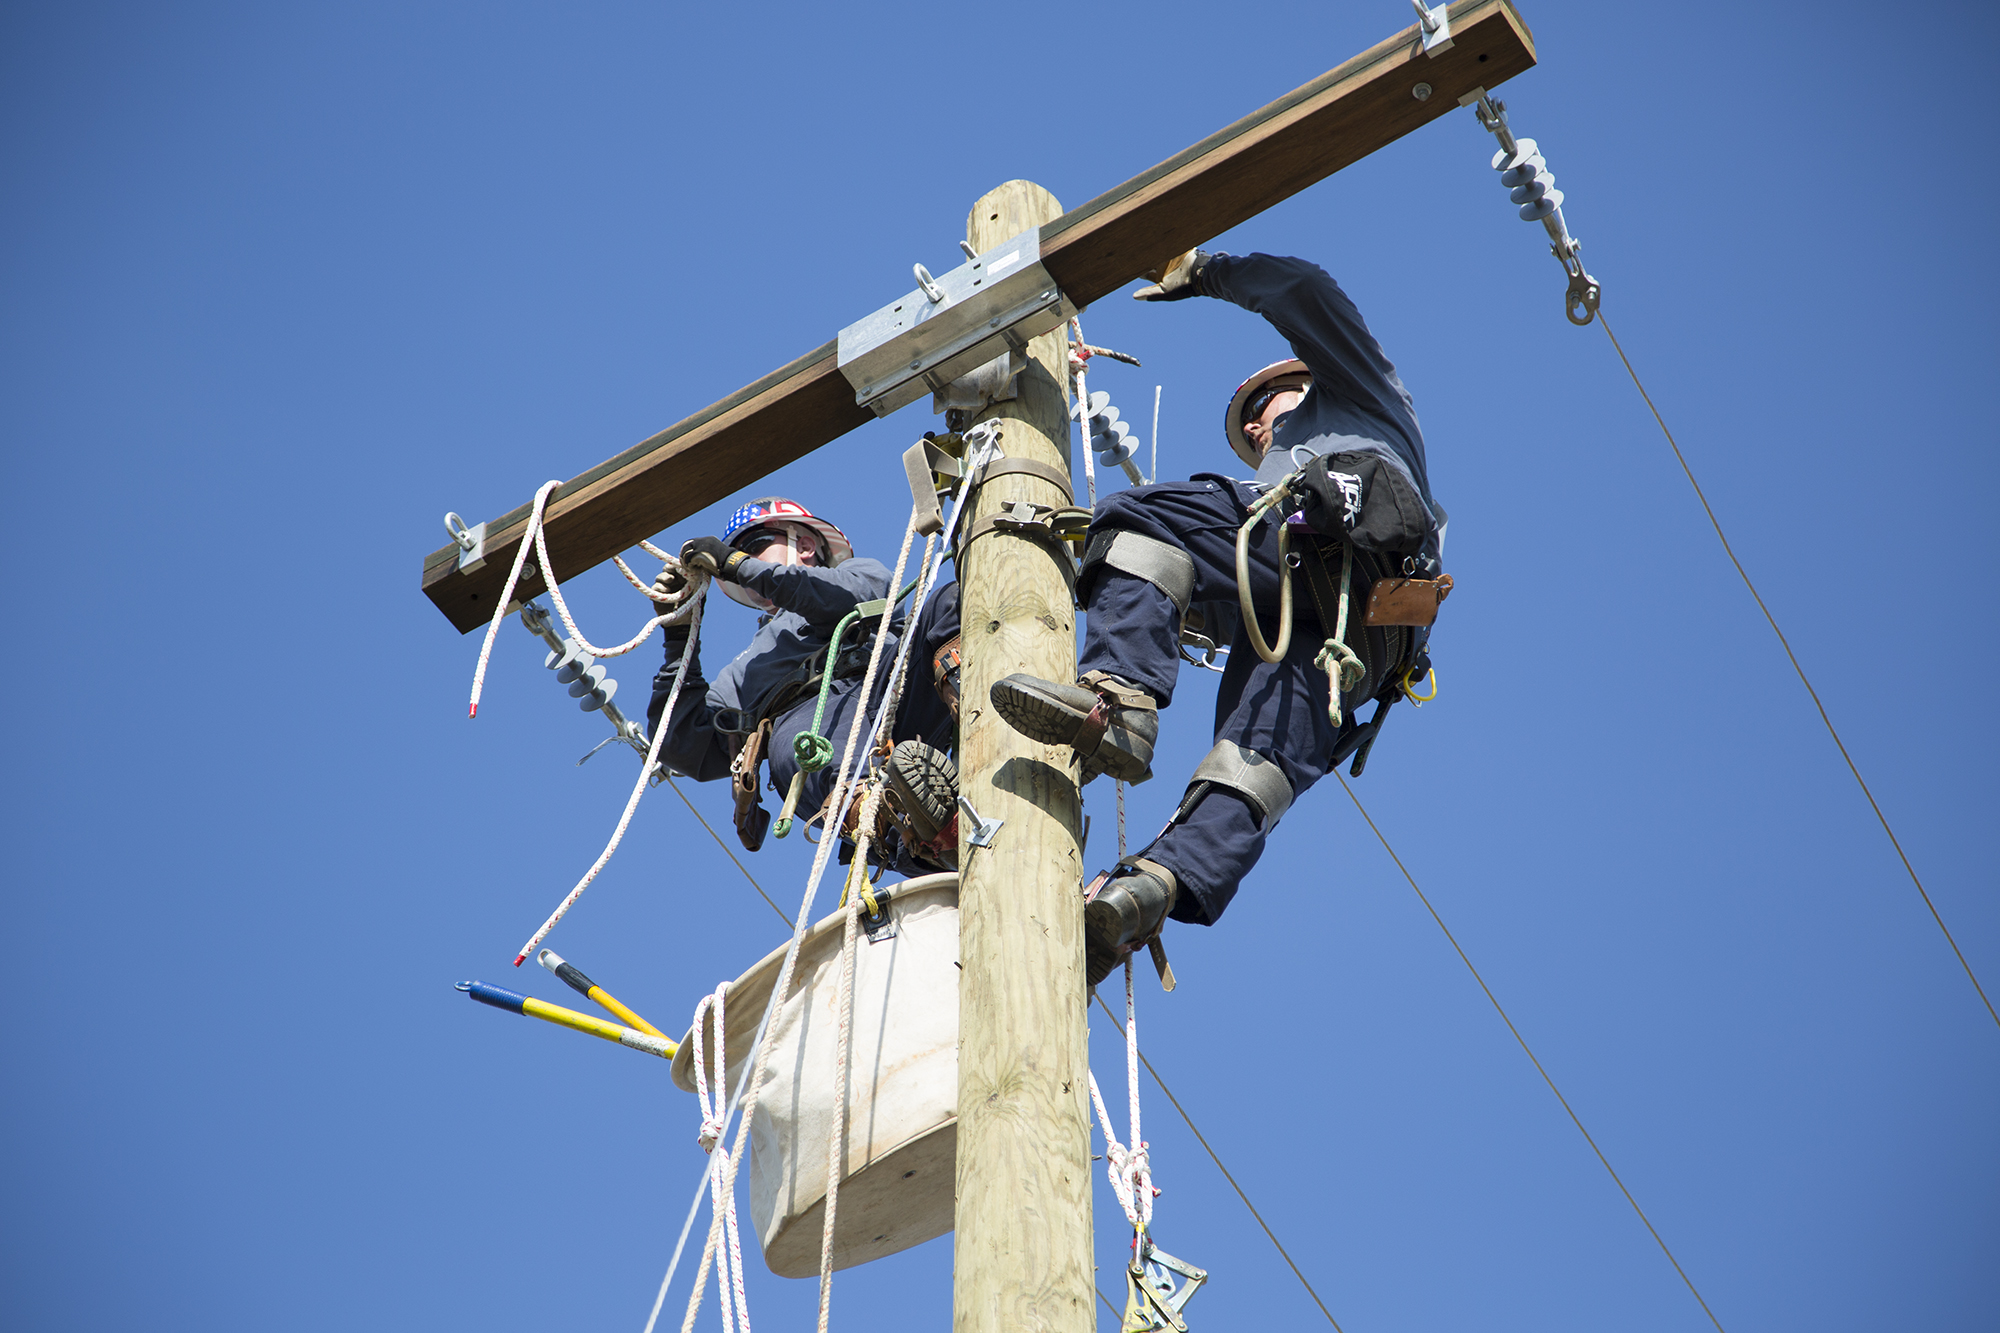 Family, Fraternity at Lineman’s Rodeo - America's Electric Cooperatives